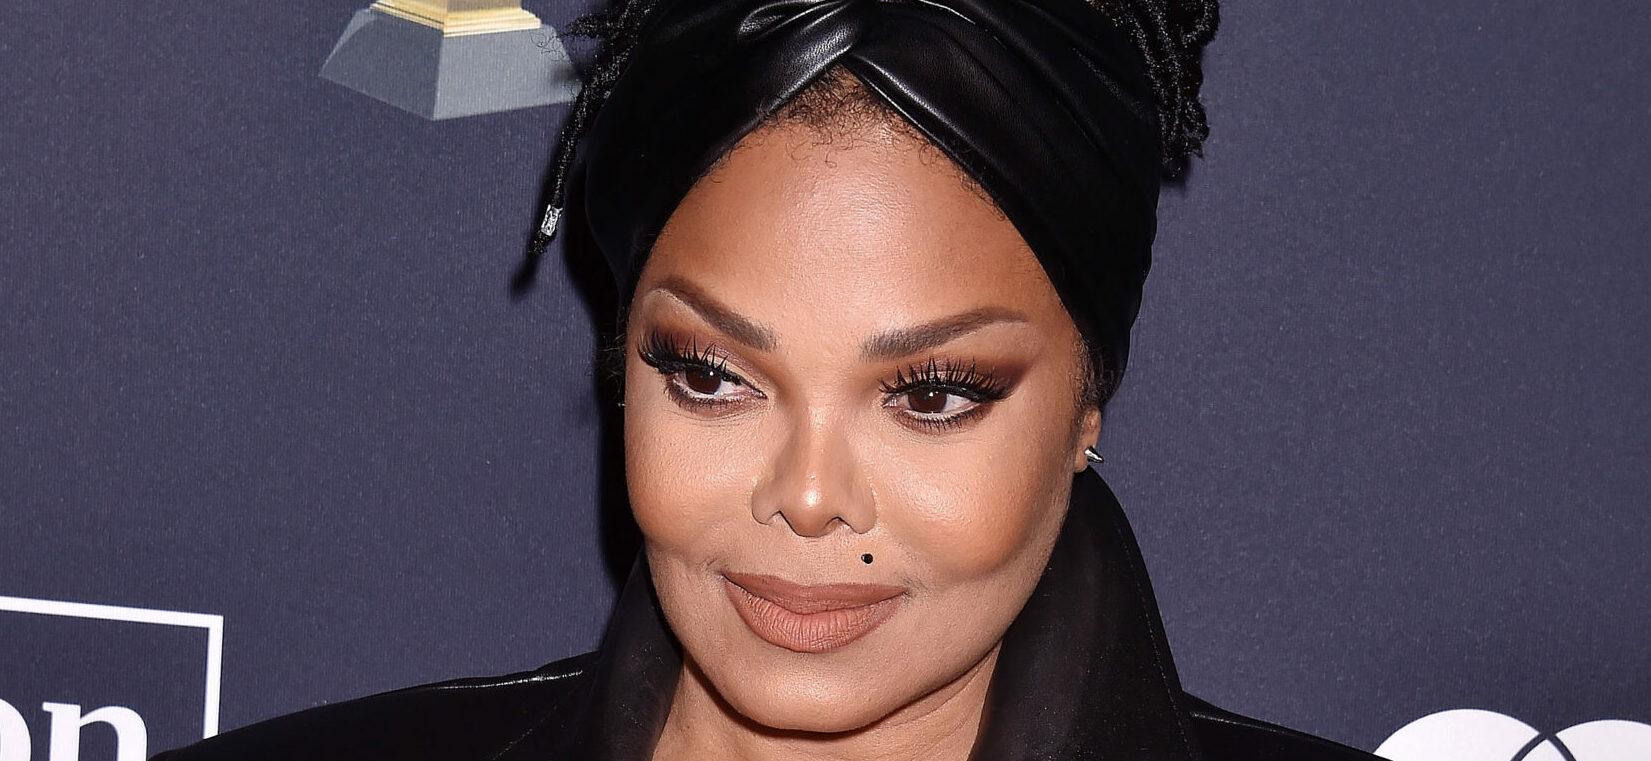 Anna Nicole Smith’s Daughter Dannielynn Donned A Janet Jackson Outfit To Pay Homage To The Icon